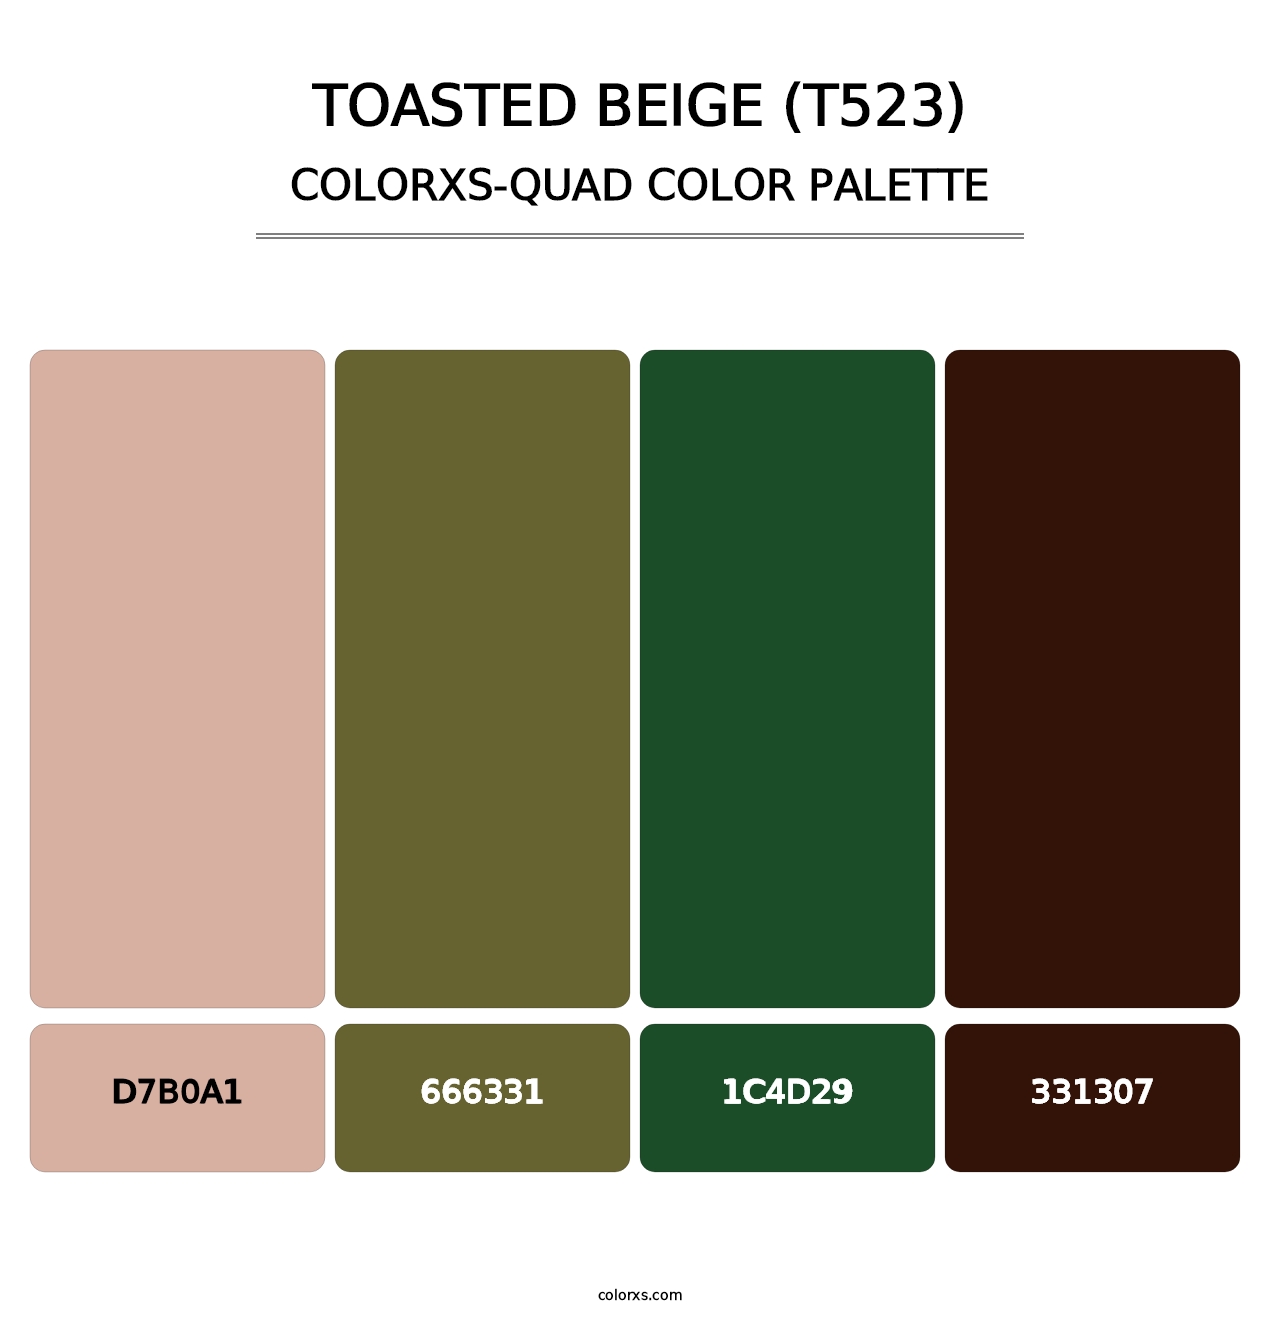 Toasted Beige (T523) - Colorxs Quad Palette